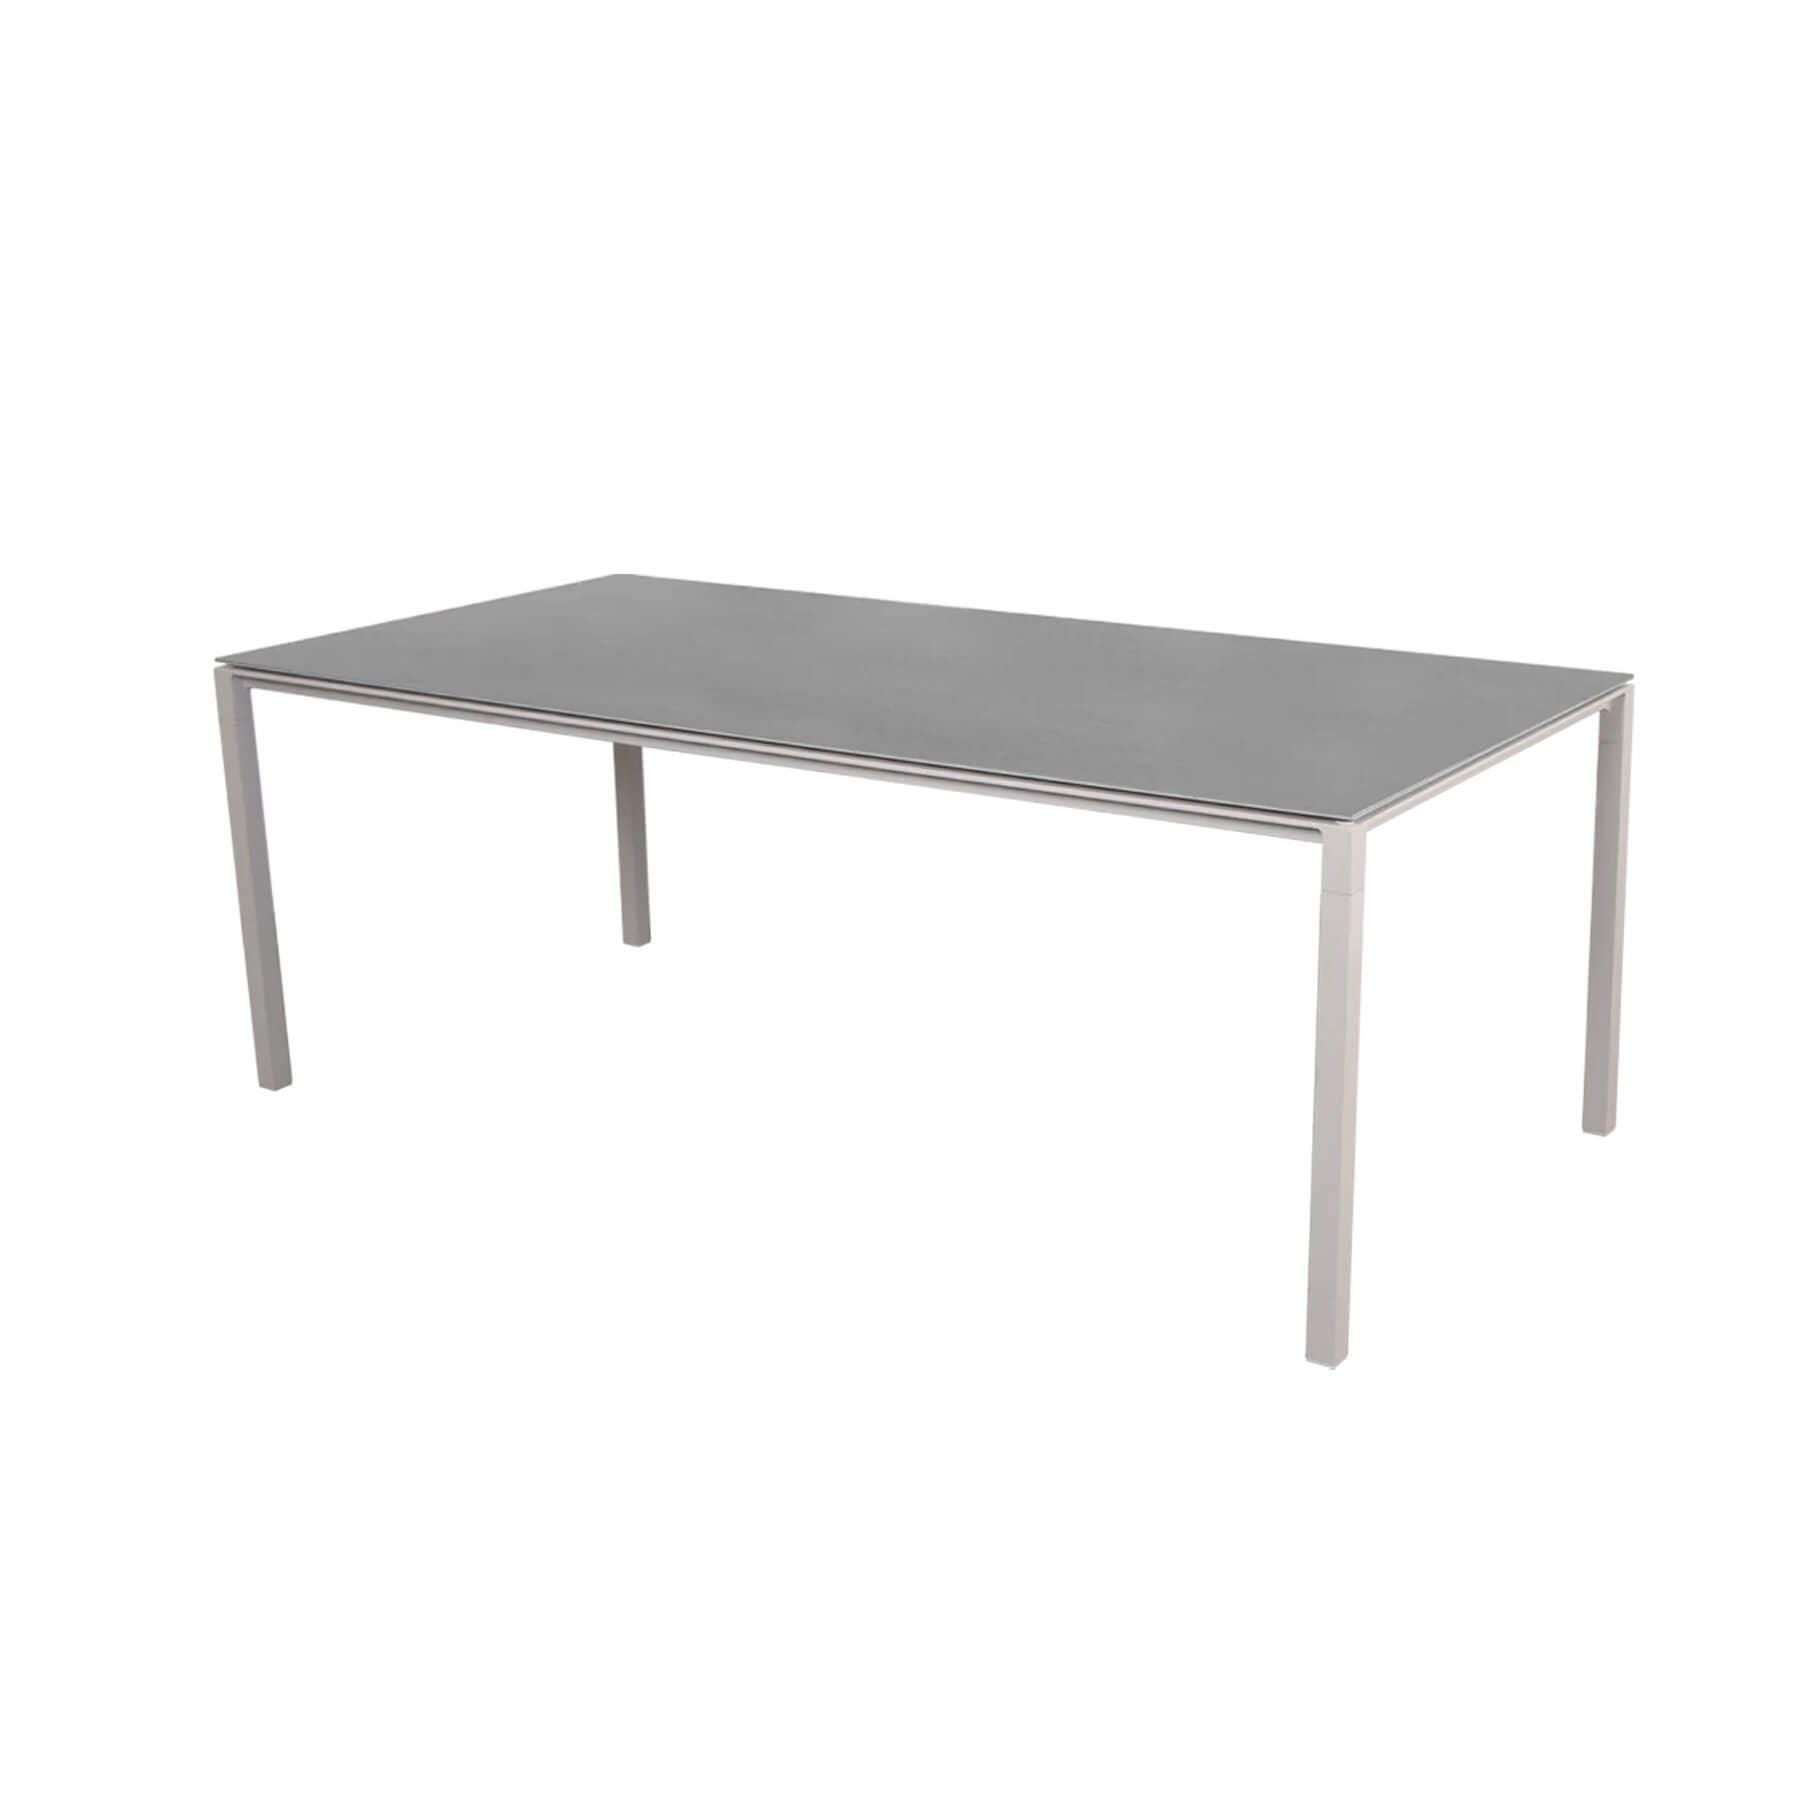 Caneline Pure Outdoor Dining Table Large Ceramic Basalt Top Sand Legs Grey